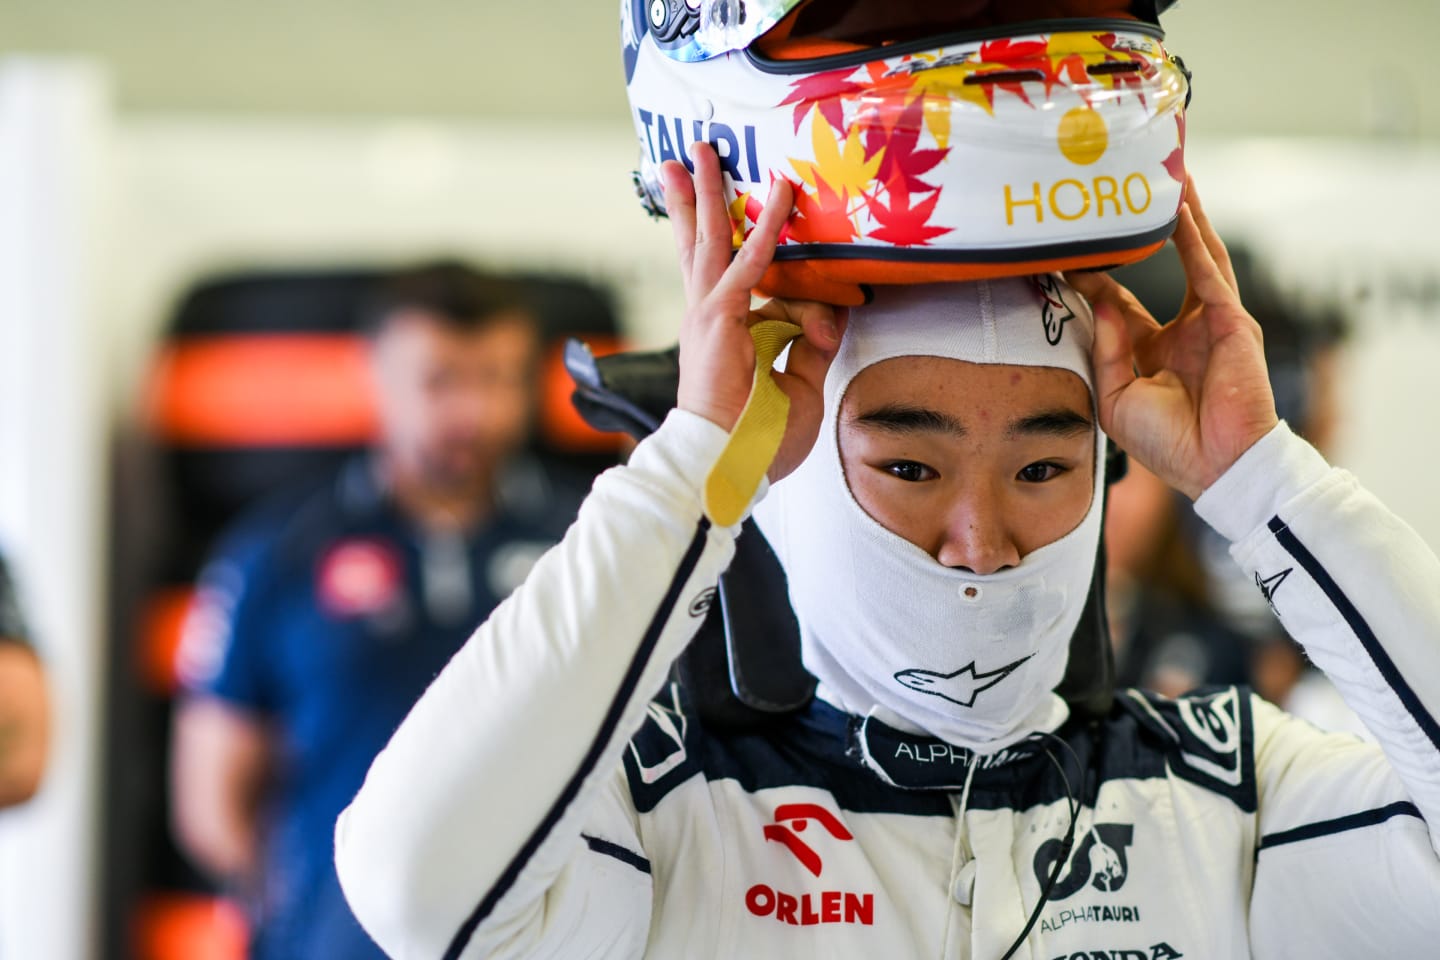 MEXICO CITY, MEXICO - OCTOBER 28: Yuki Tsunoda of Japan and Scuderia AlphaTauri prepares to drive in the garage during qualifying ahead of the F1 Grand Prix of Mexico at Autodromo Hermanos Rodriguez on October 28, 2023 in Mexico City, Mexico. (Photo by Rudy Carezzevoli/Getty Images)